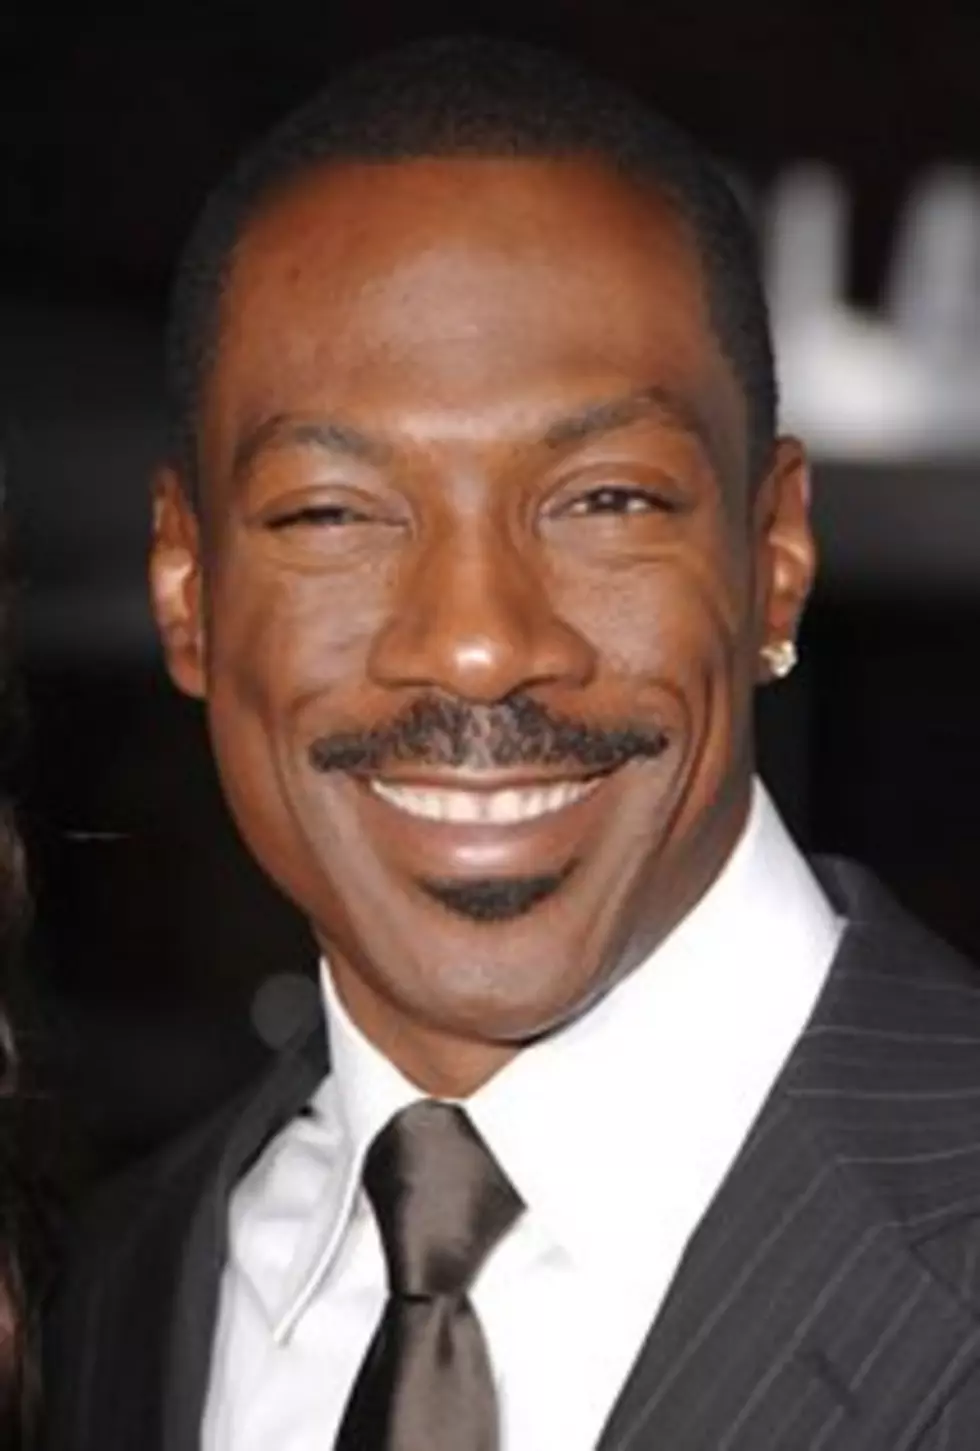 EDDIE MURPHY REPORTEDLY SET TO STAR IN ‘COMING TO AMERICA’ SEQUEL